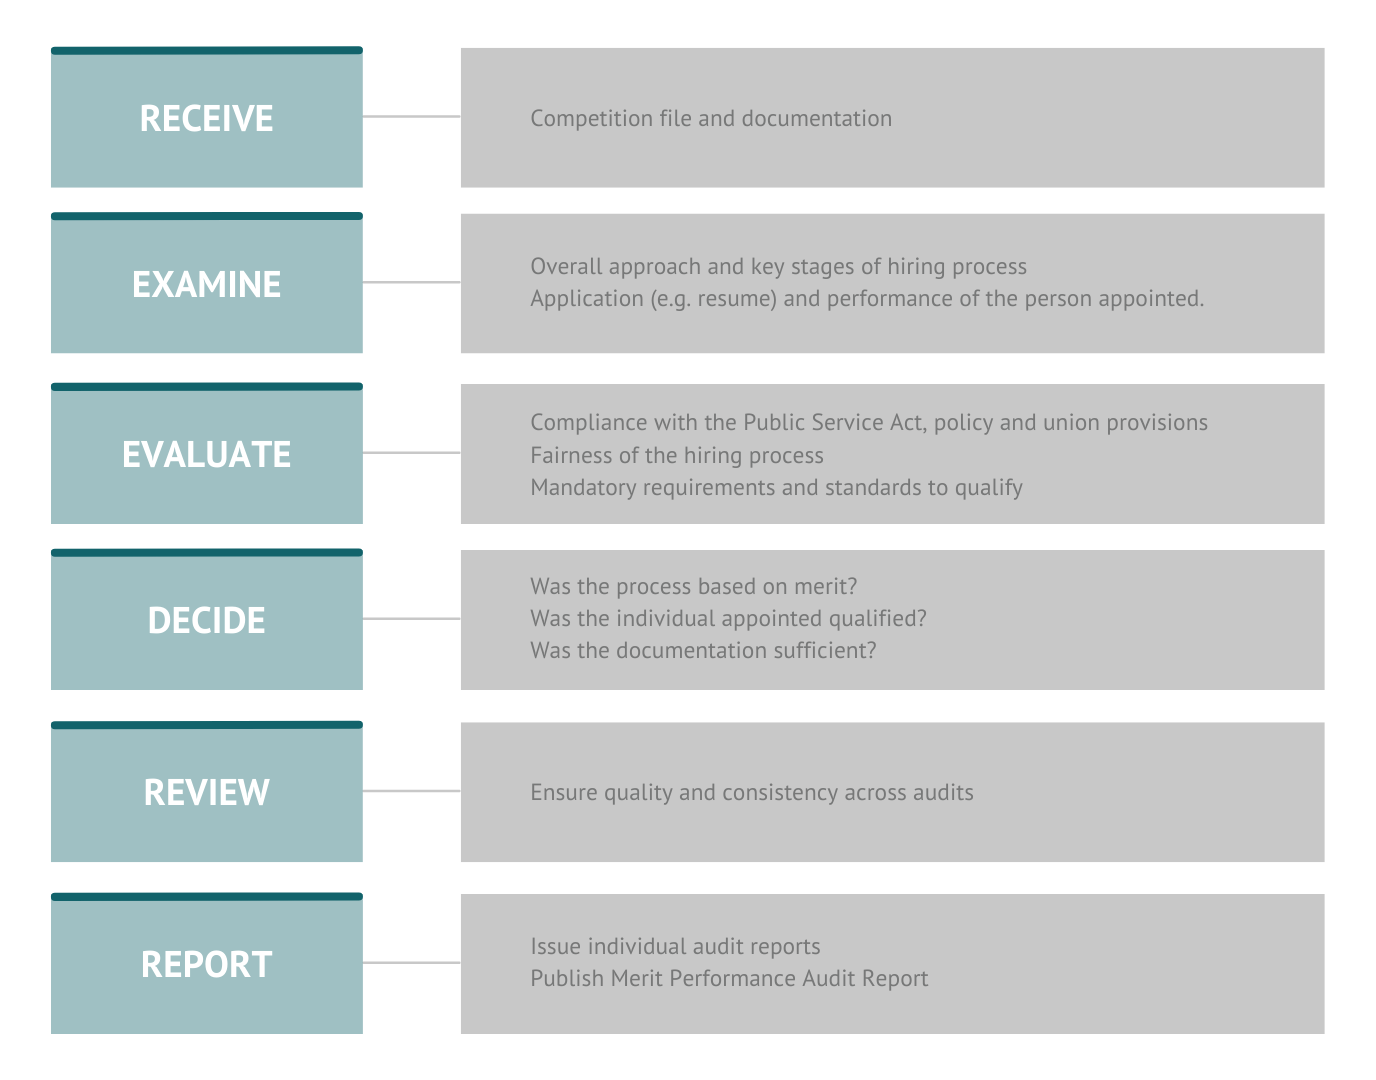 Table summarizing the steps of the audit process: Receive, Examine, Evaluate, Decide, Review, Report.